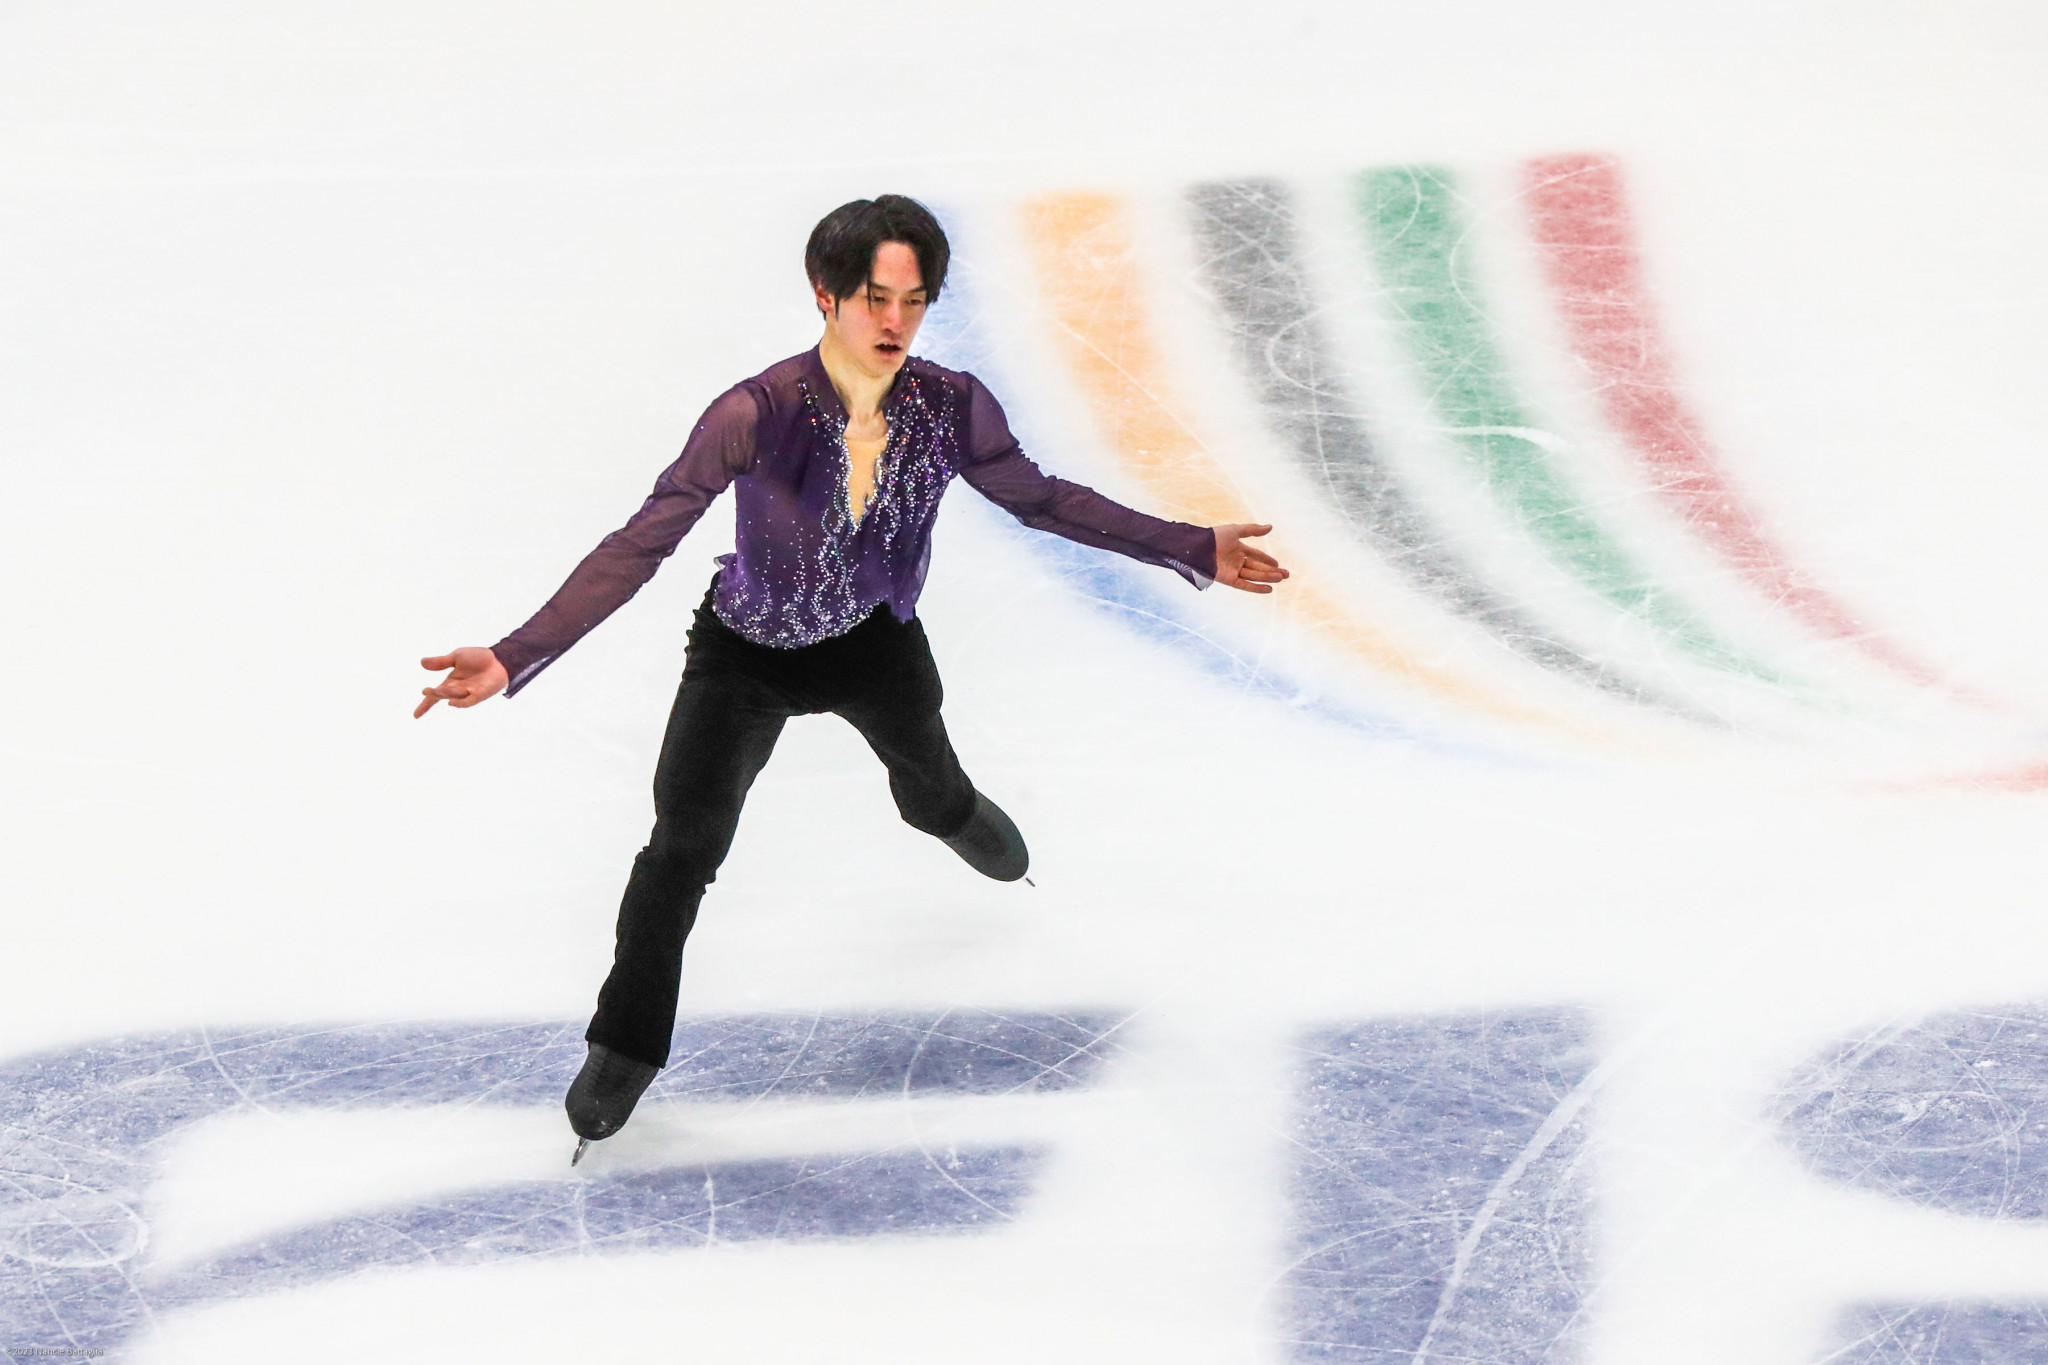 Sota Yamamoto starred again as he secured the men's singles figure skating event to the delight of his dedicated fanbase ©FISU